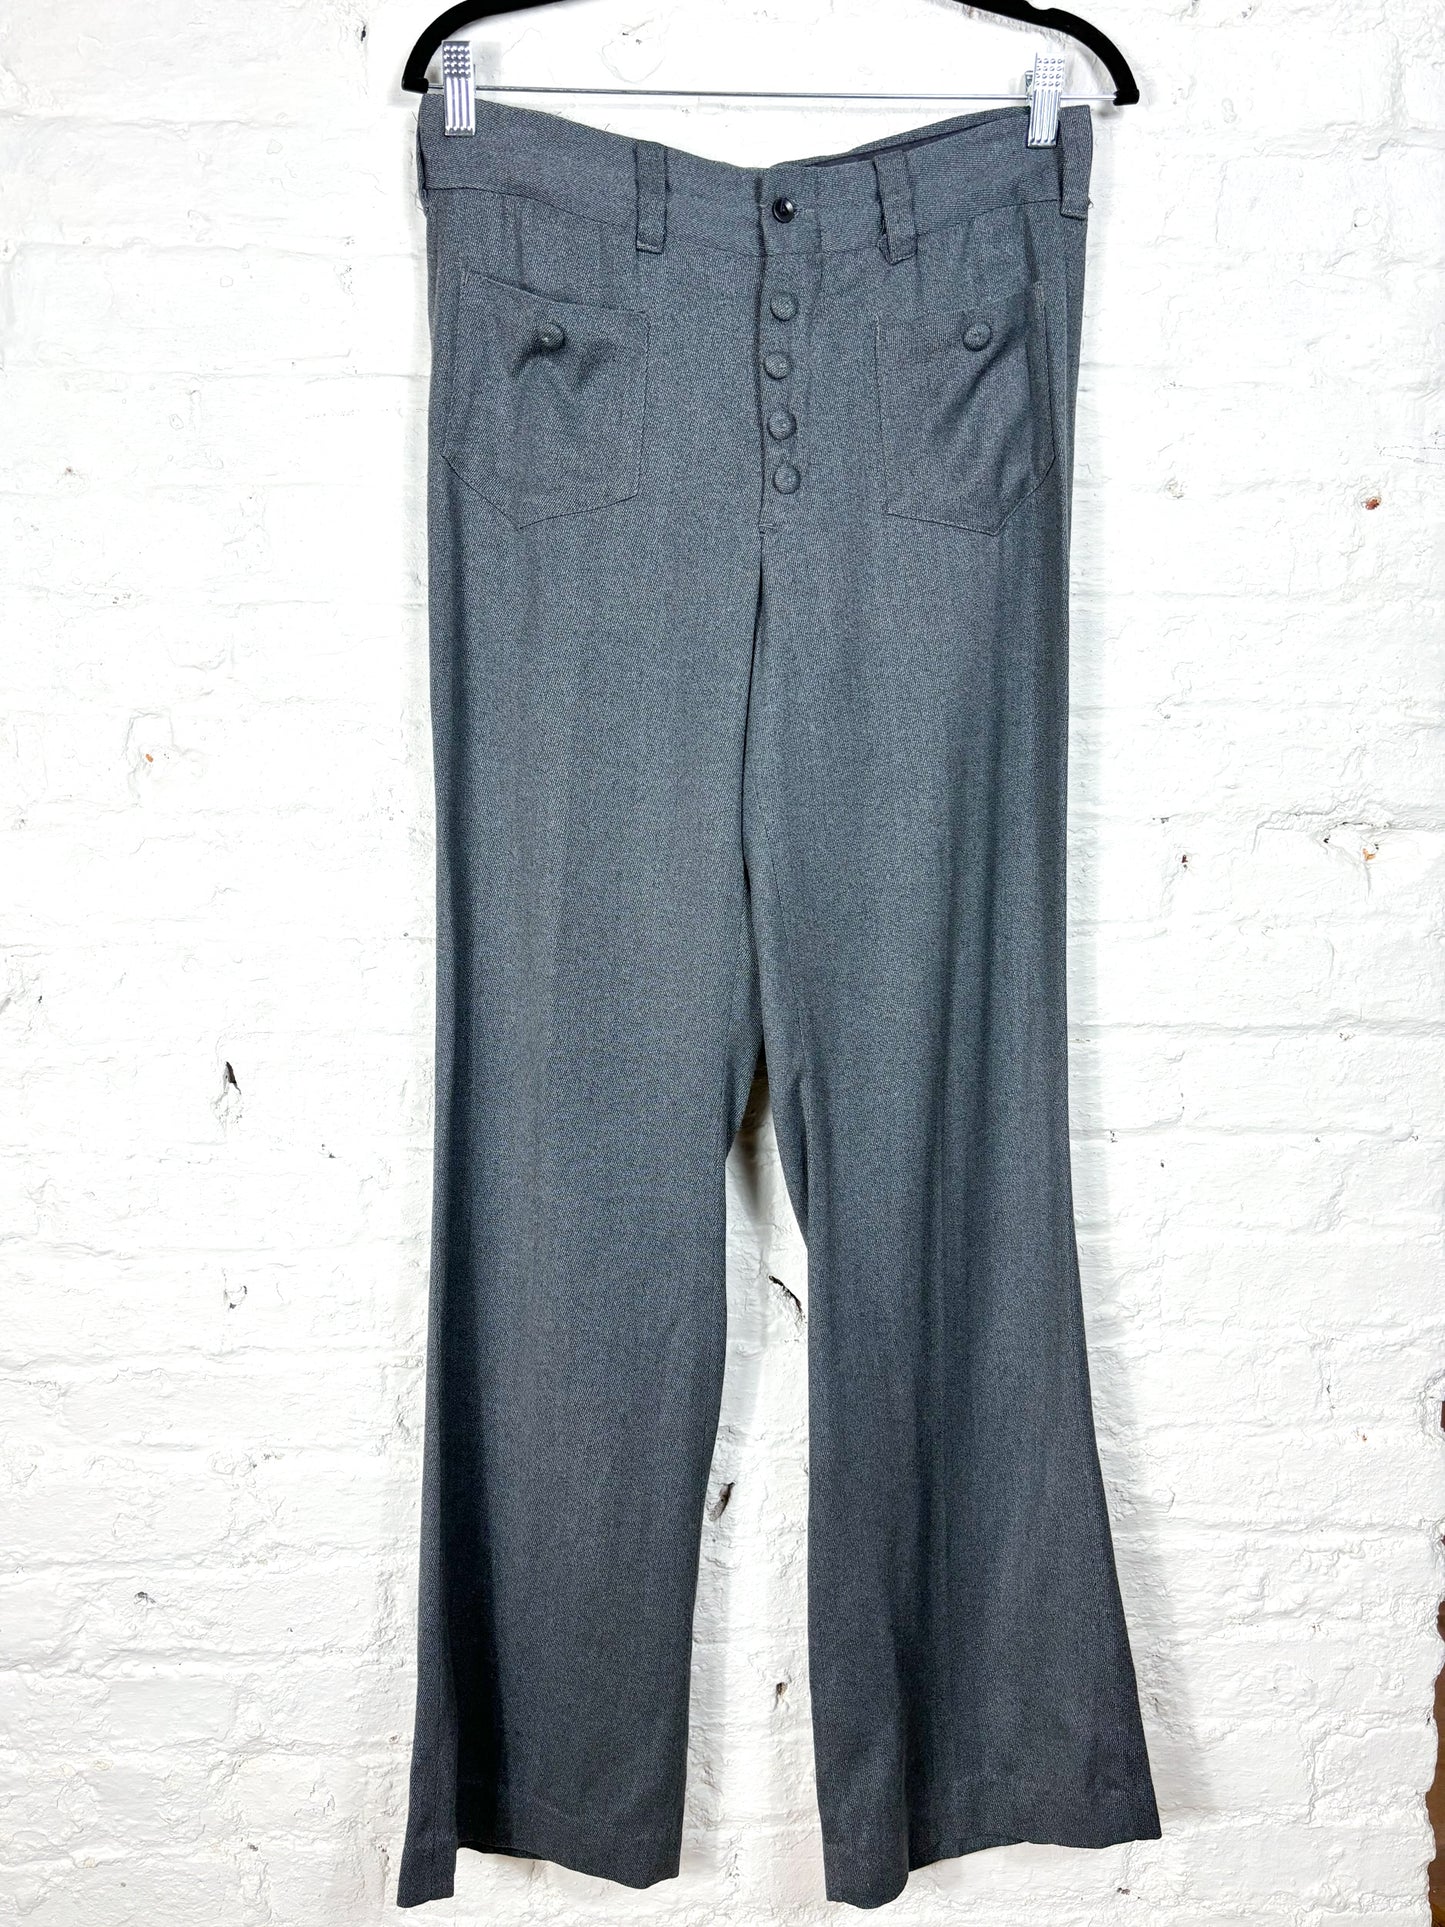 70's Grey Twill "Flairs" Bell Bottom Trousers | M/L